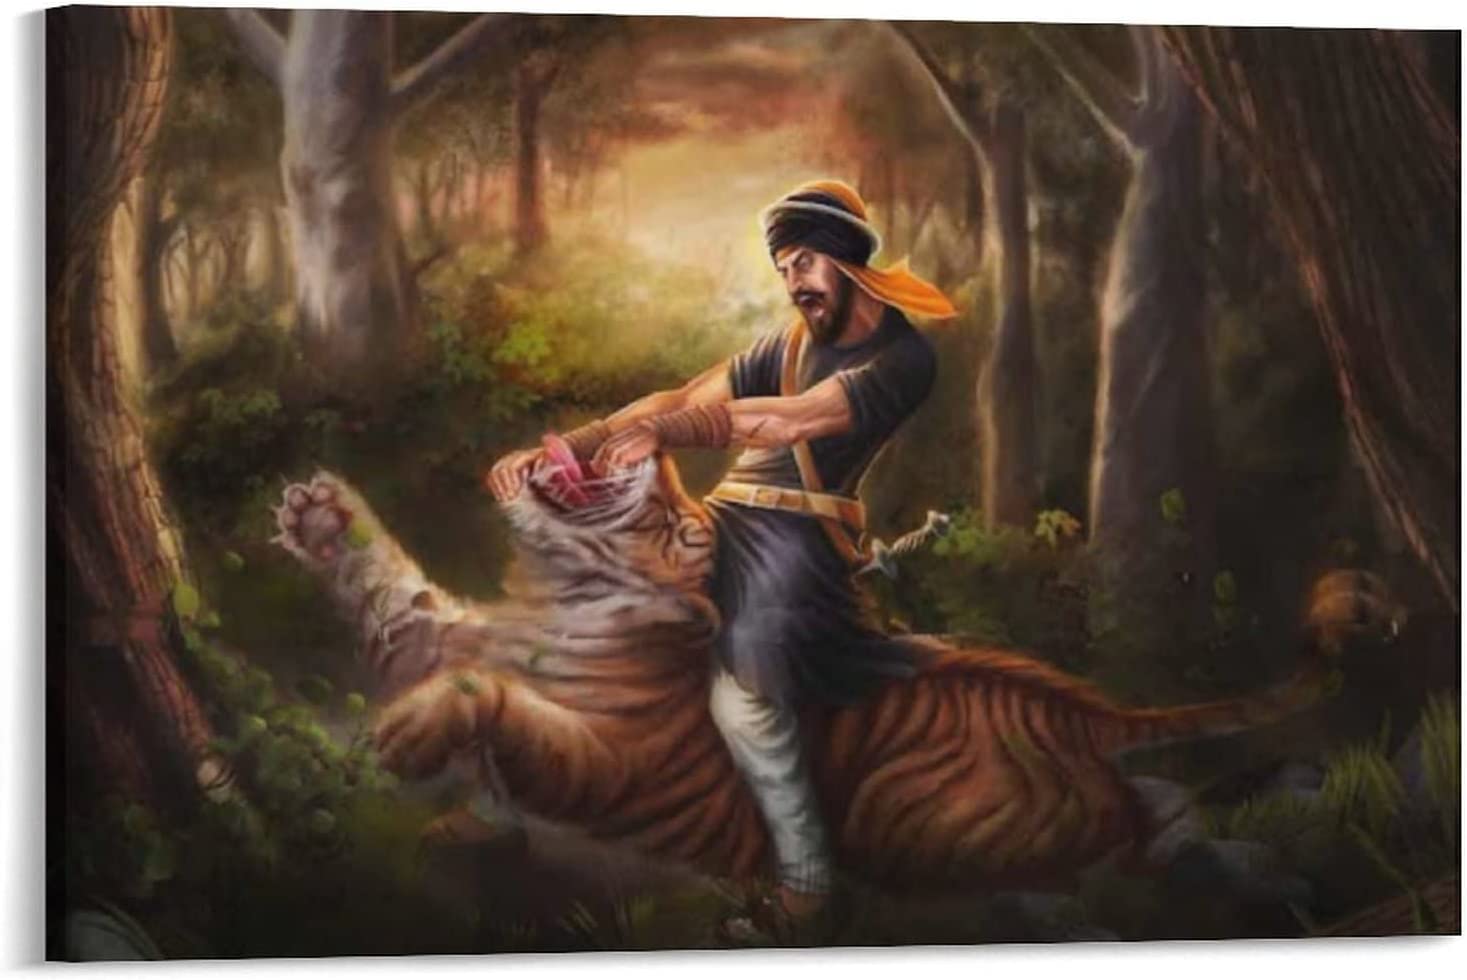 Sardar Hari Singh Nalwa Killer Tiger Poster Cool Poster Art Prints Wall Painting Artworks Posters Hanging Picture Gift Bedroom Home Decor 08x12inch(20x30cm): Posters & Prints